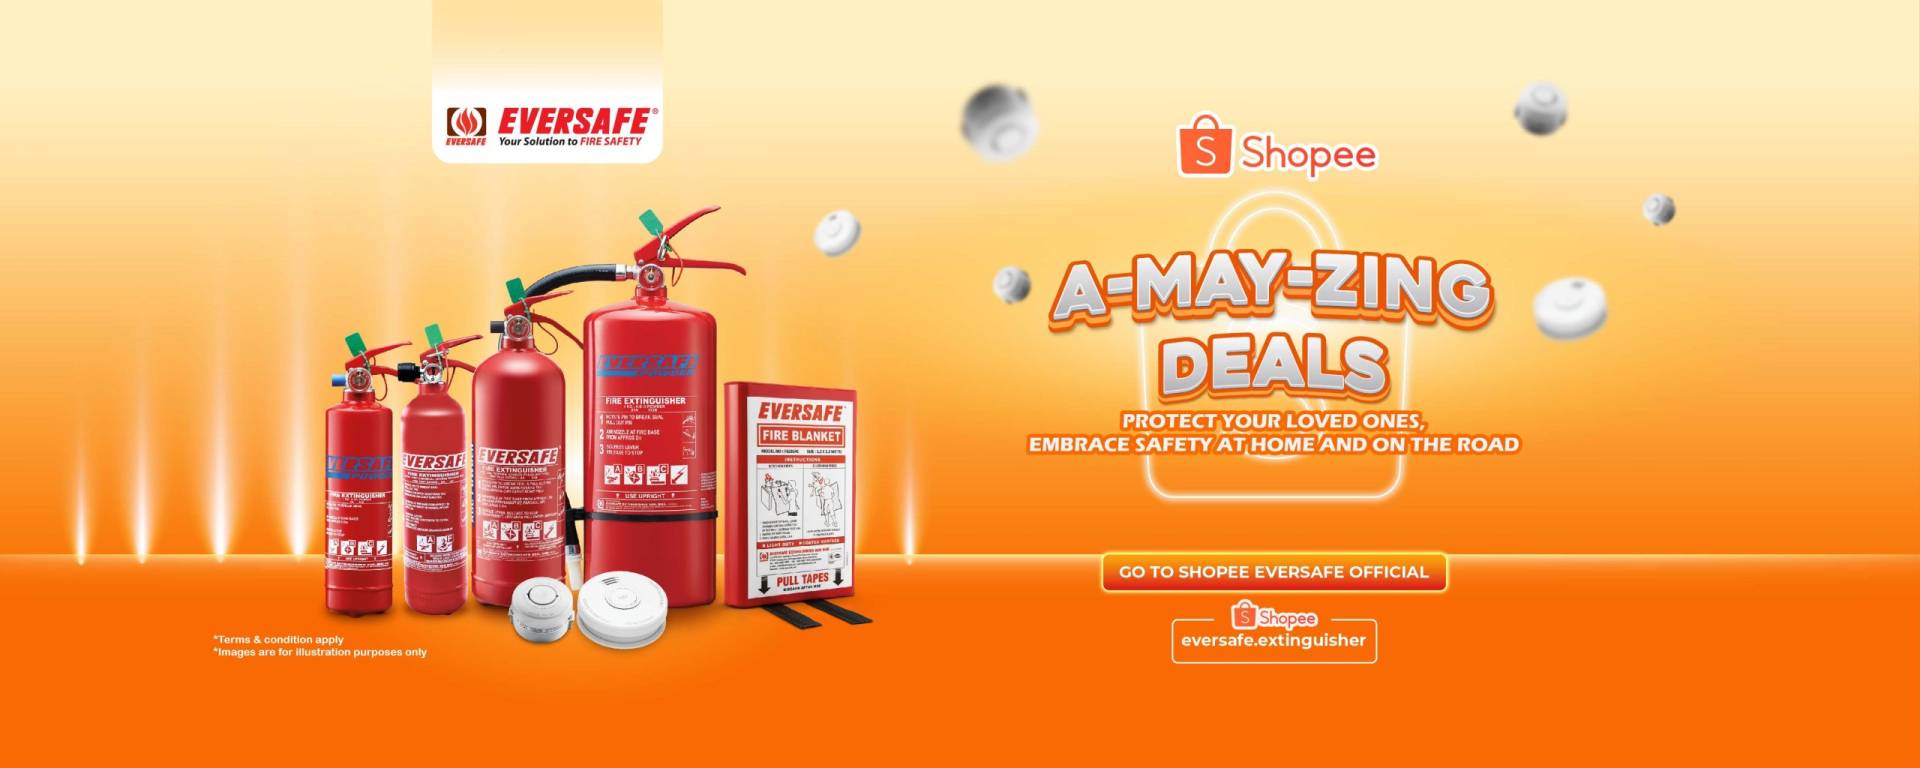 Shopee Eversafe Extinguisher Your Solution to Fire Safety